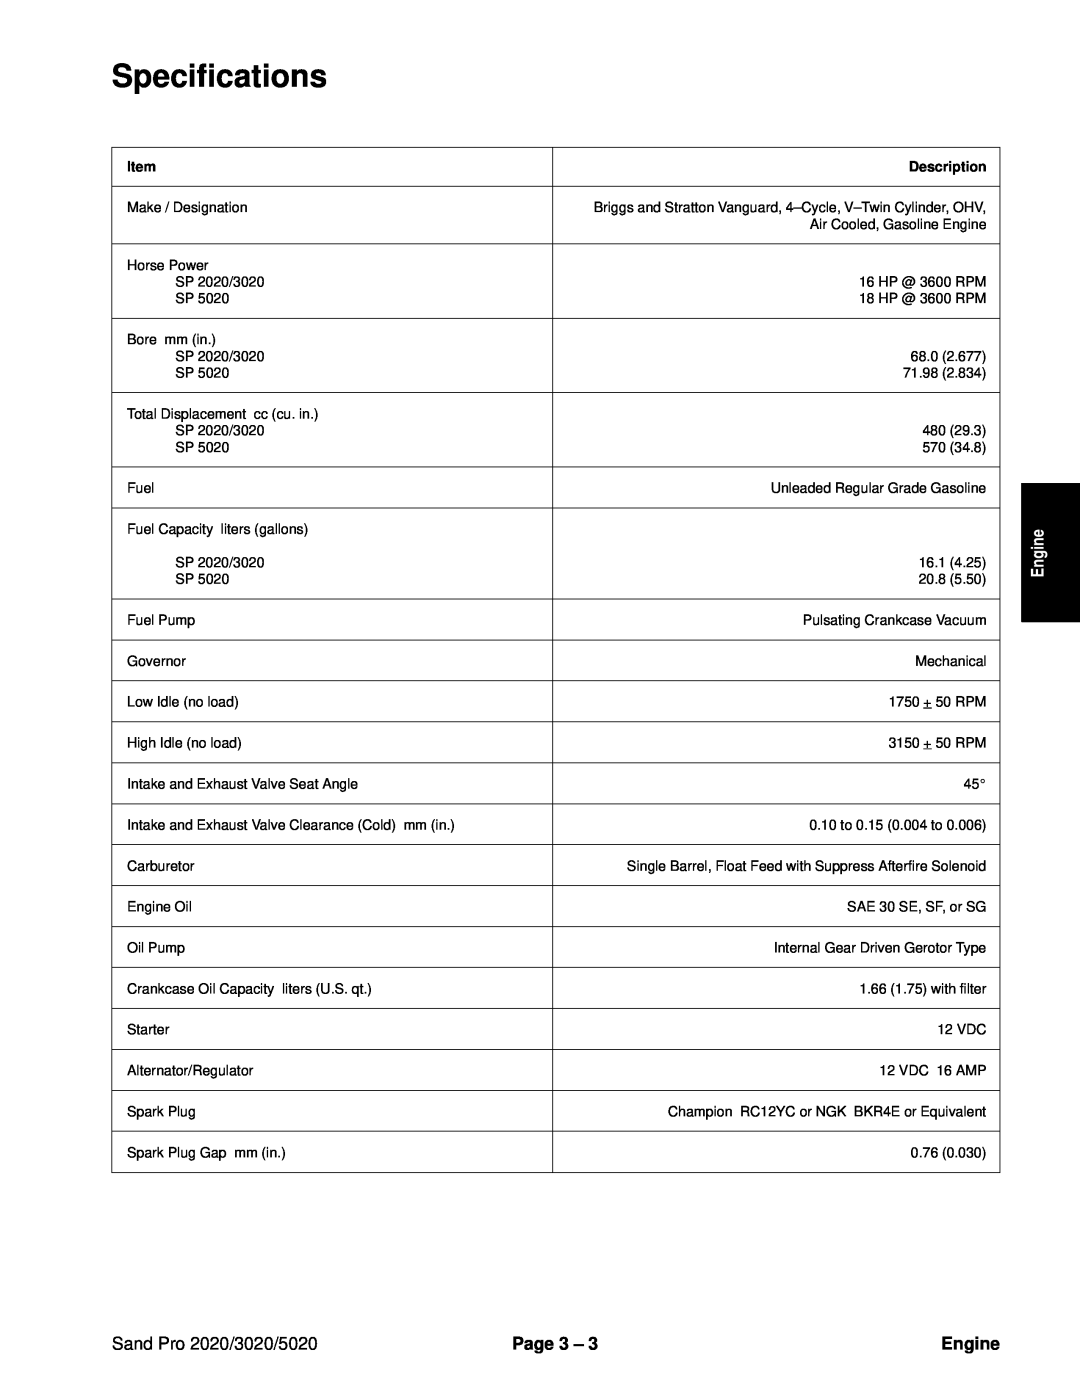 Toro service manual Specifications, Engine, Sand Pro 2020/3020/5020, Page 3 